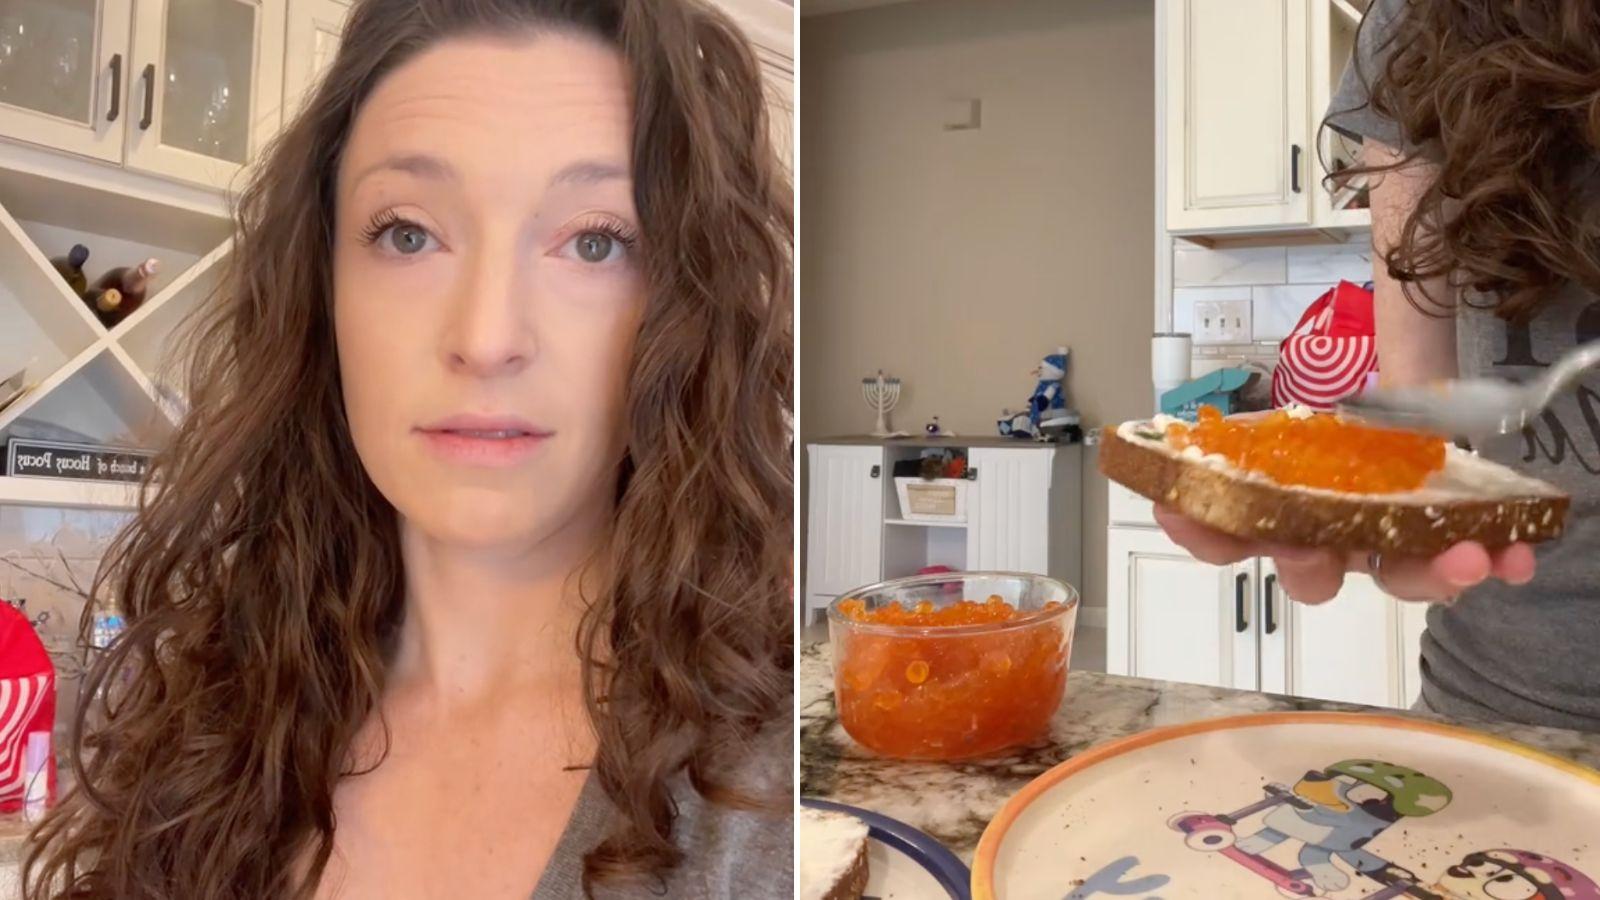 Mom reveals her children have an expensive "caviar addiction"